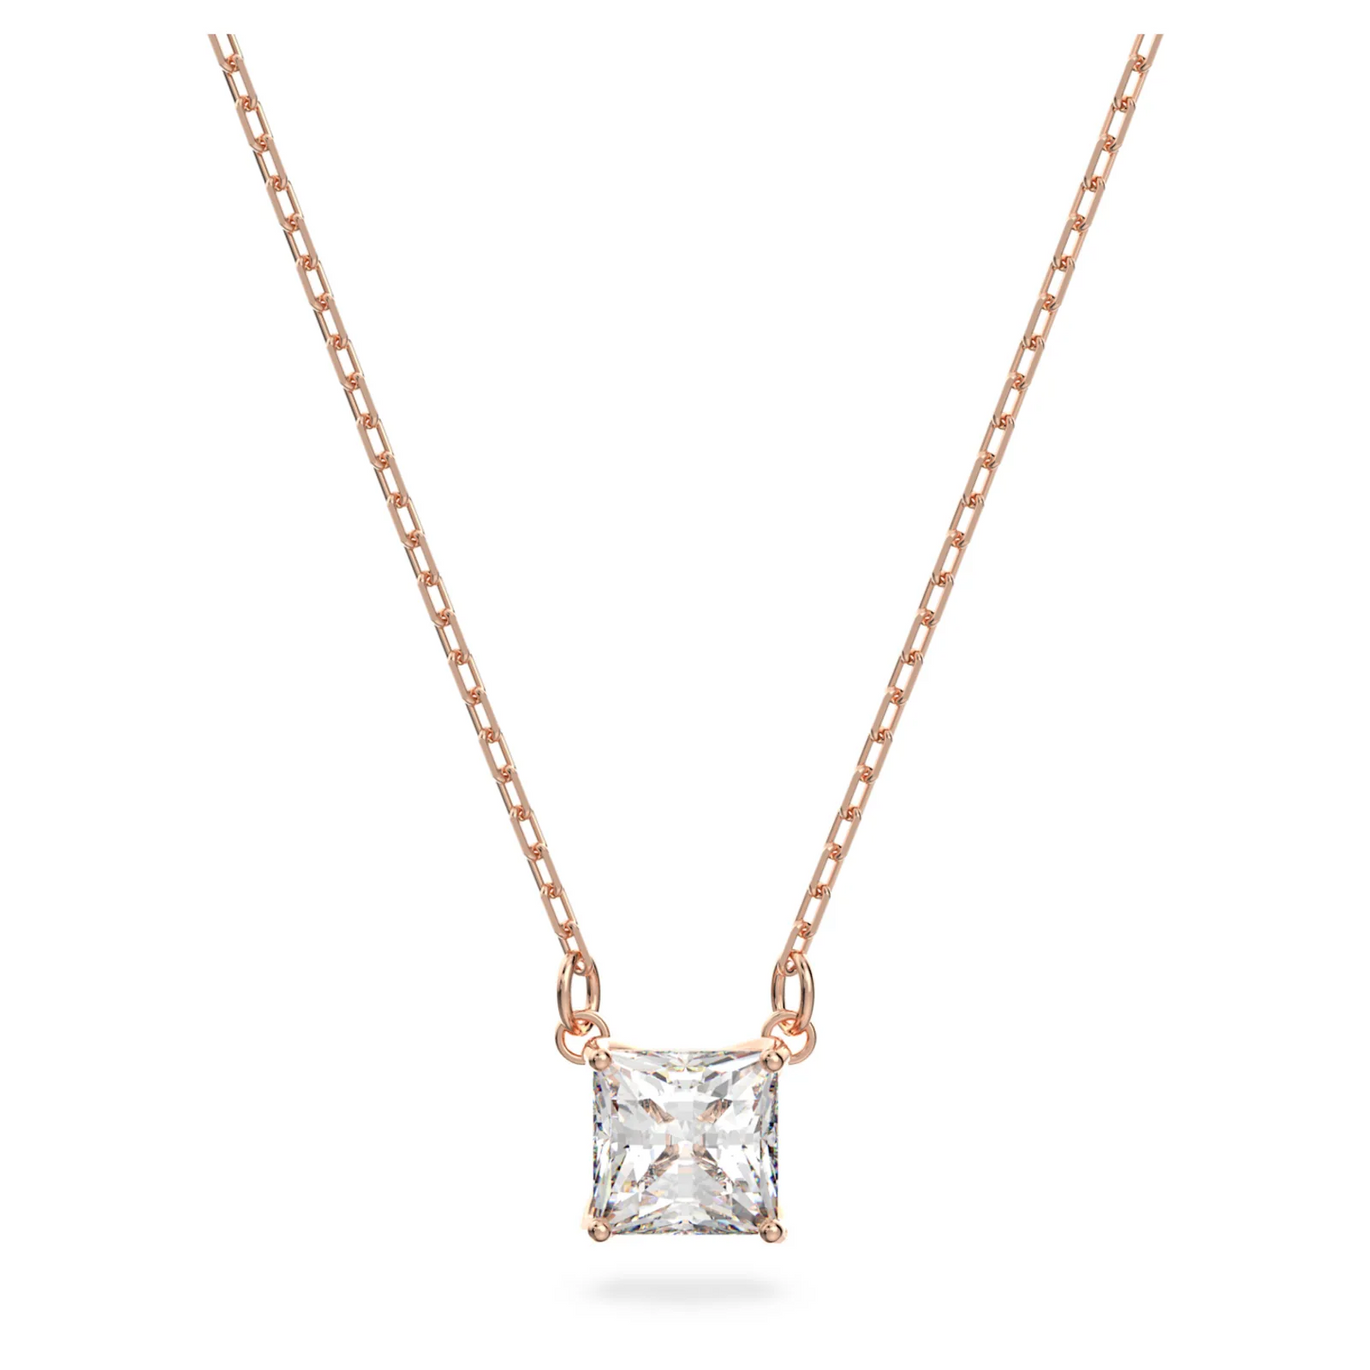 Swarovski Attract Necklace, White, Rose gold tone Plated